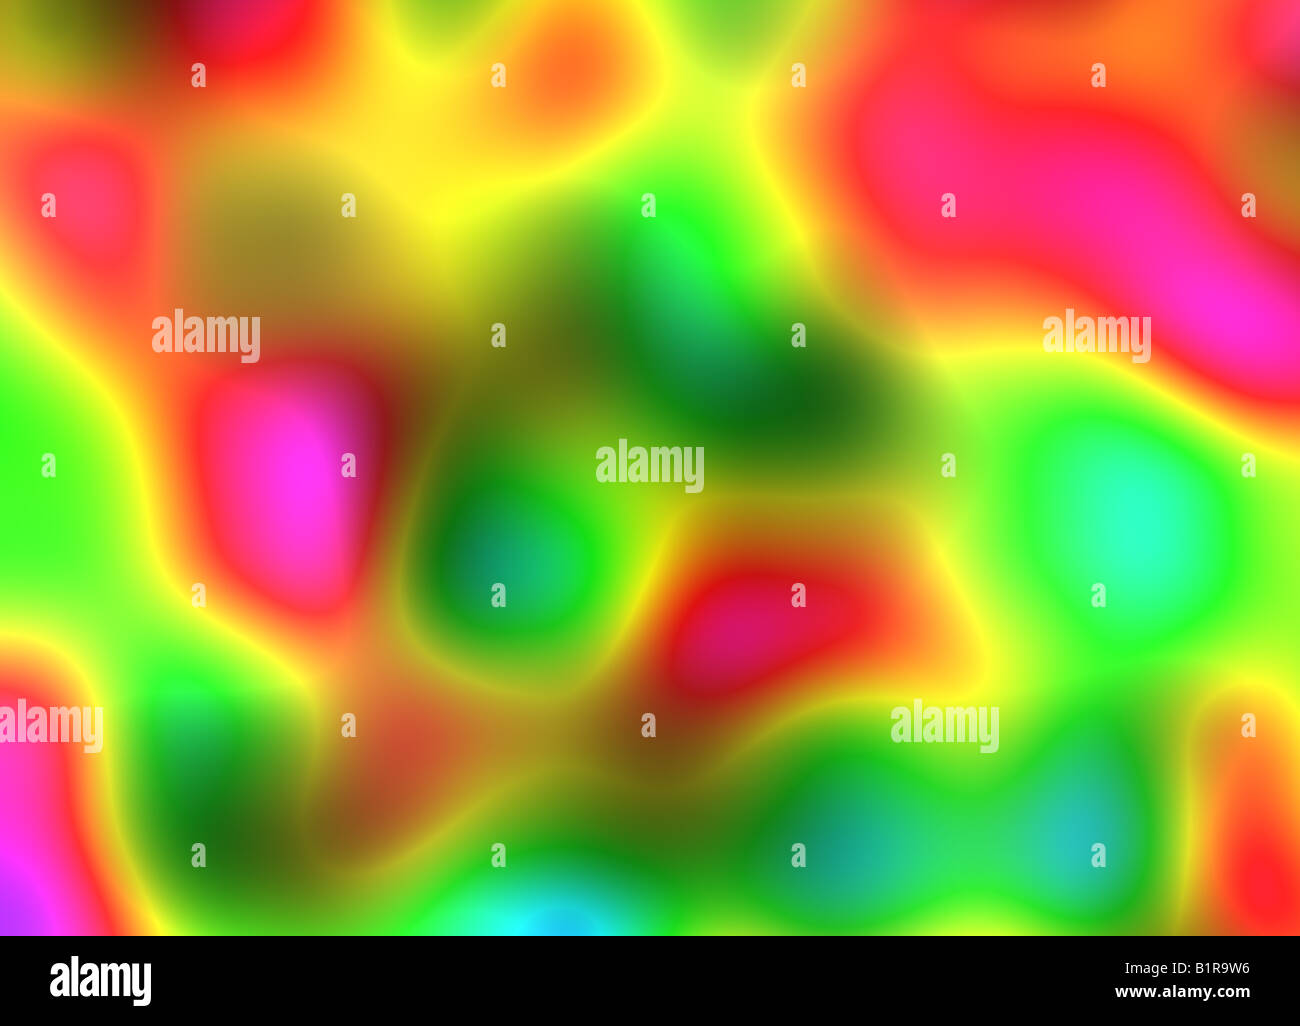 Abstract color gradient texture Stock Photo